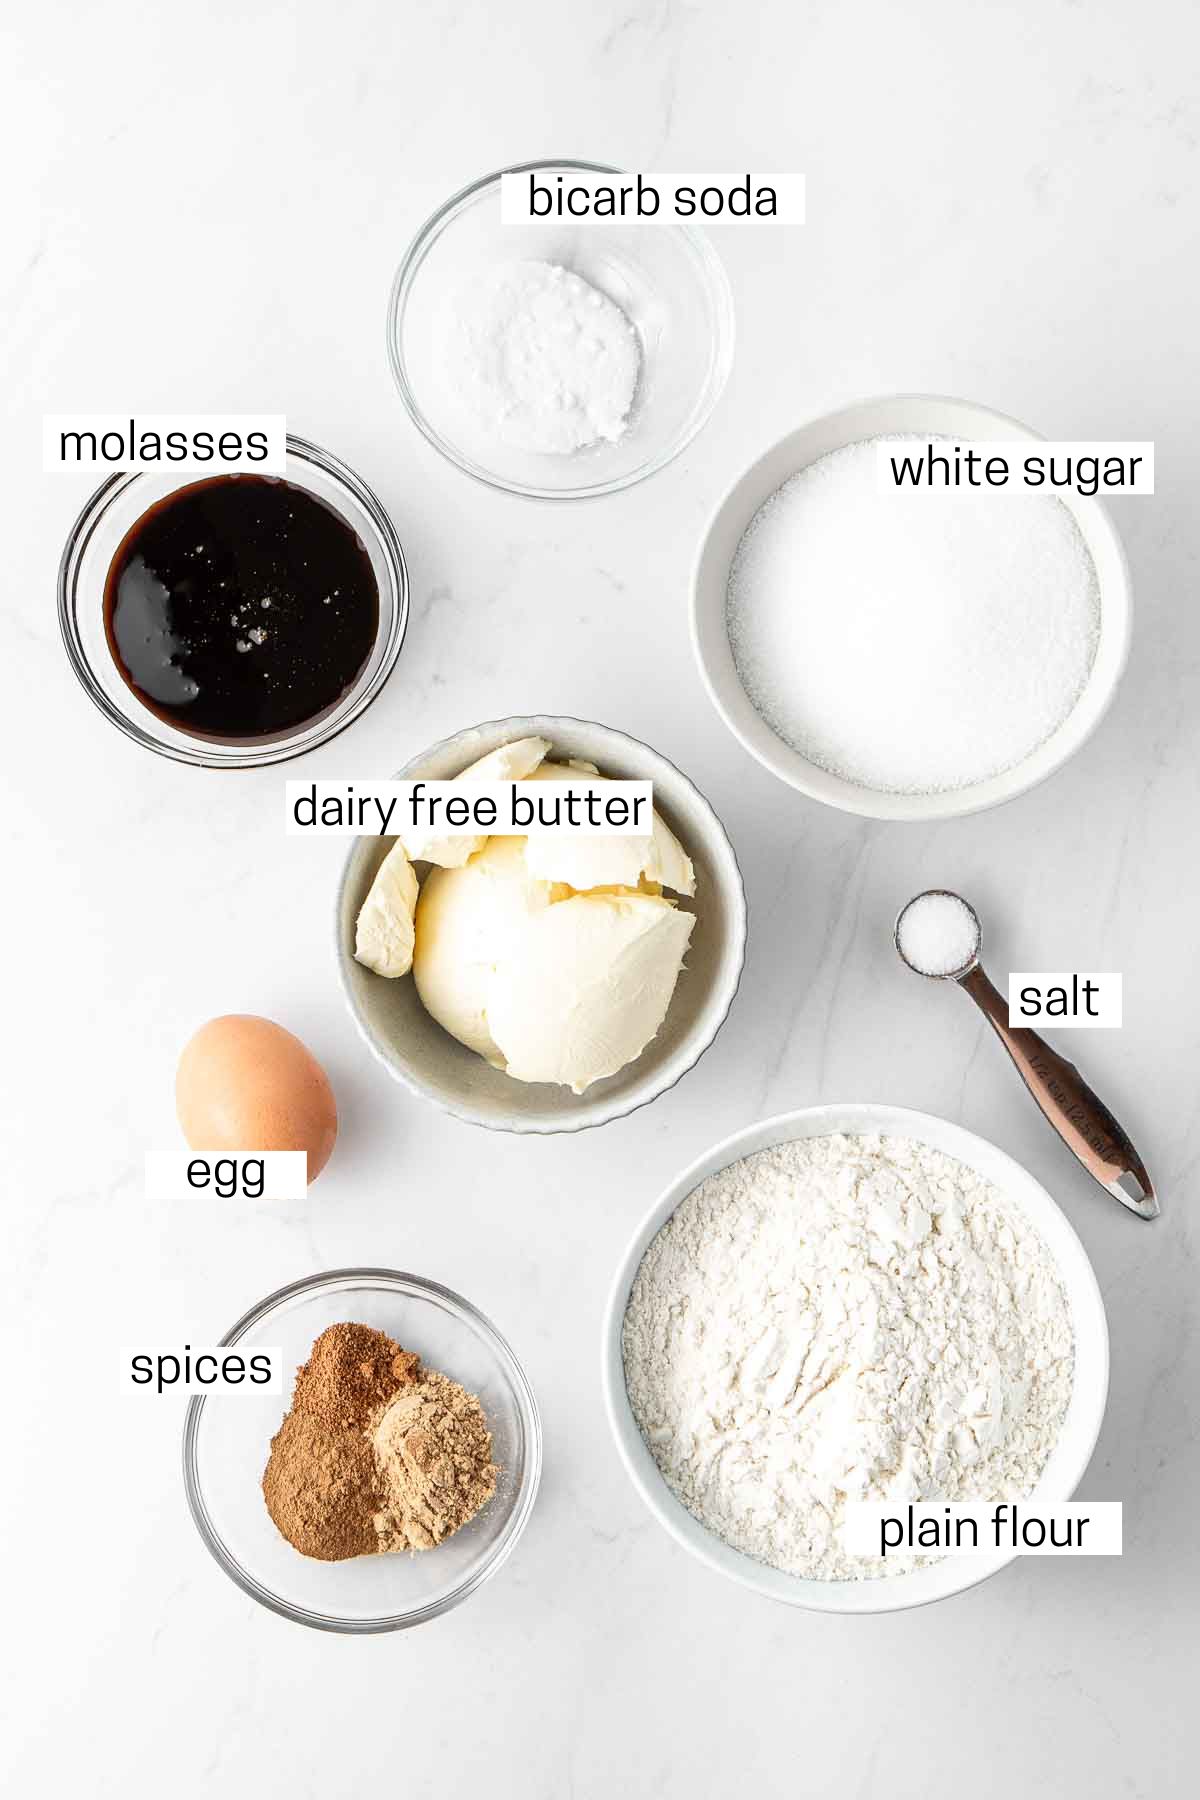 All ingredients needed for ginger snap biscuits. 